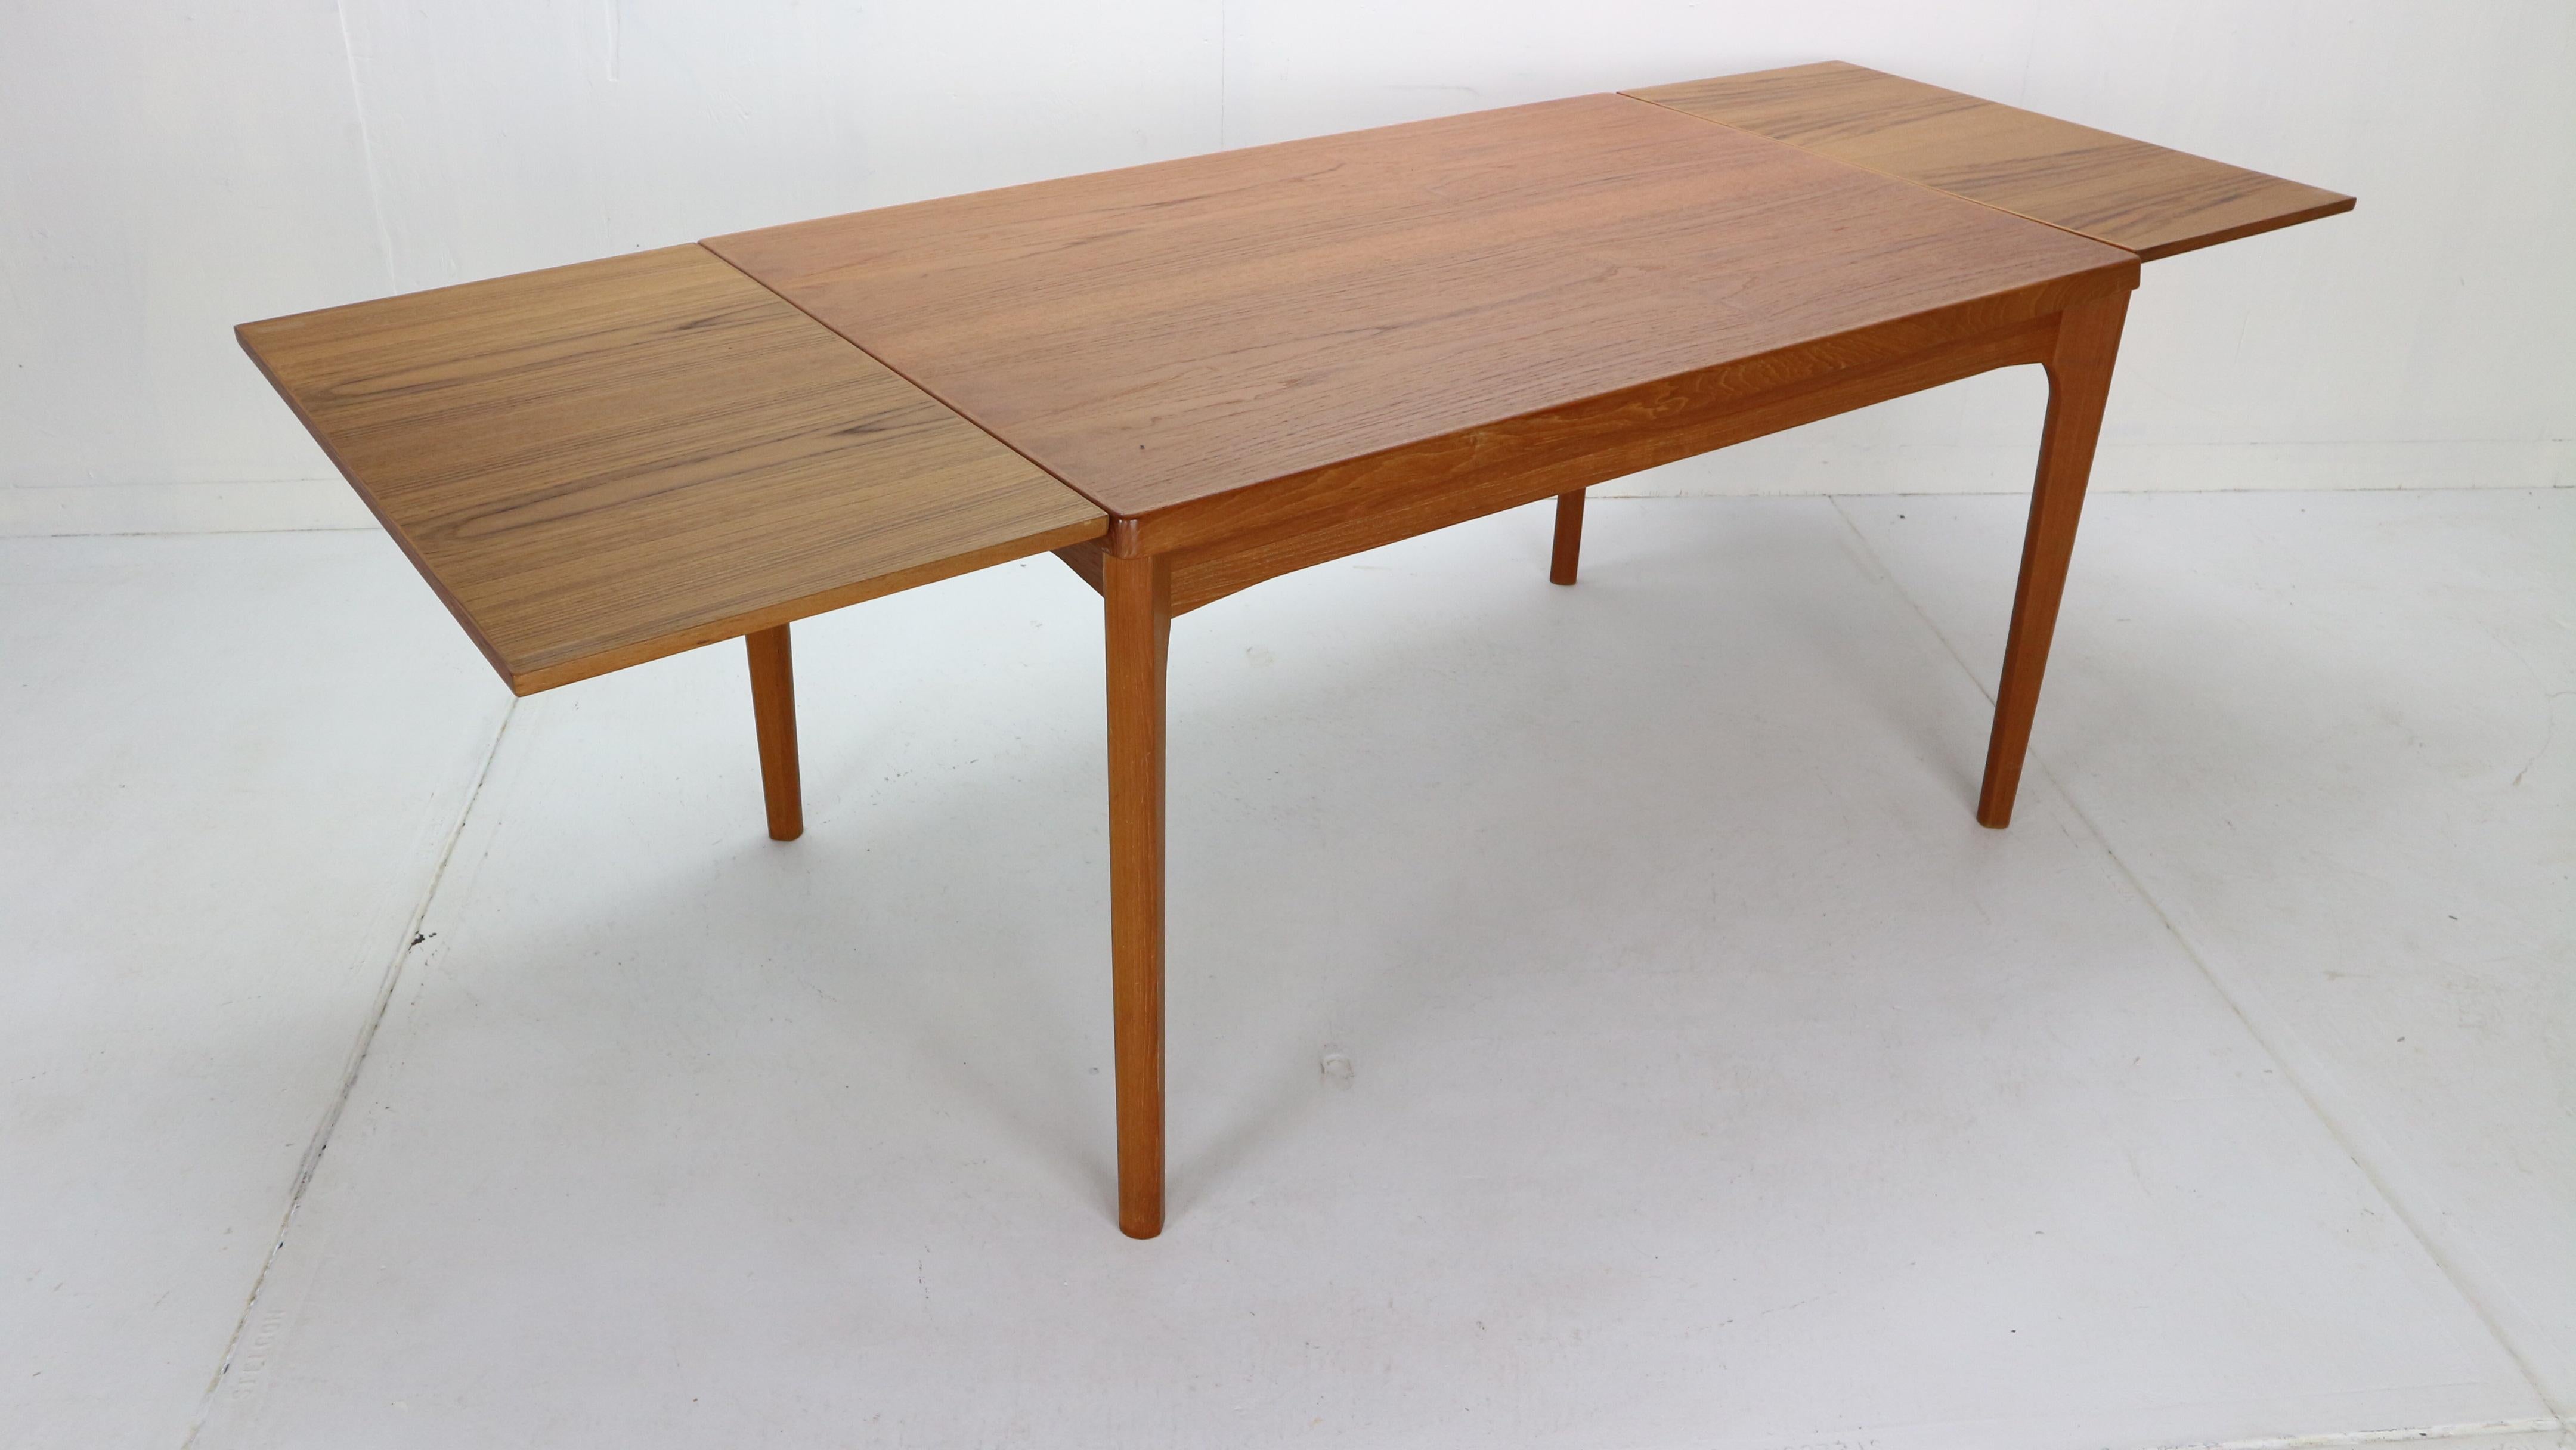 This Mid-Century Modern Danish design dining table was designed by Henning Kjaernulf for Vejle Stole Møbelfabrik during the 1960s Denmark.
The table is extendable to 209cm wide, then not extended 119cm wide.
Teak wood
Originally marked.